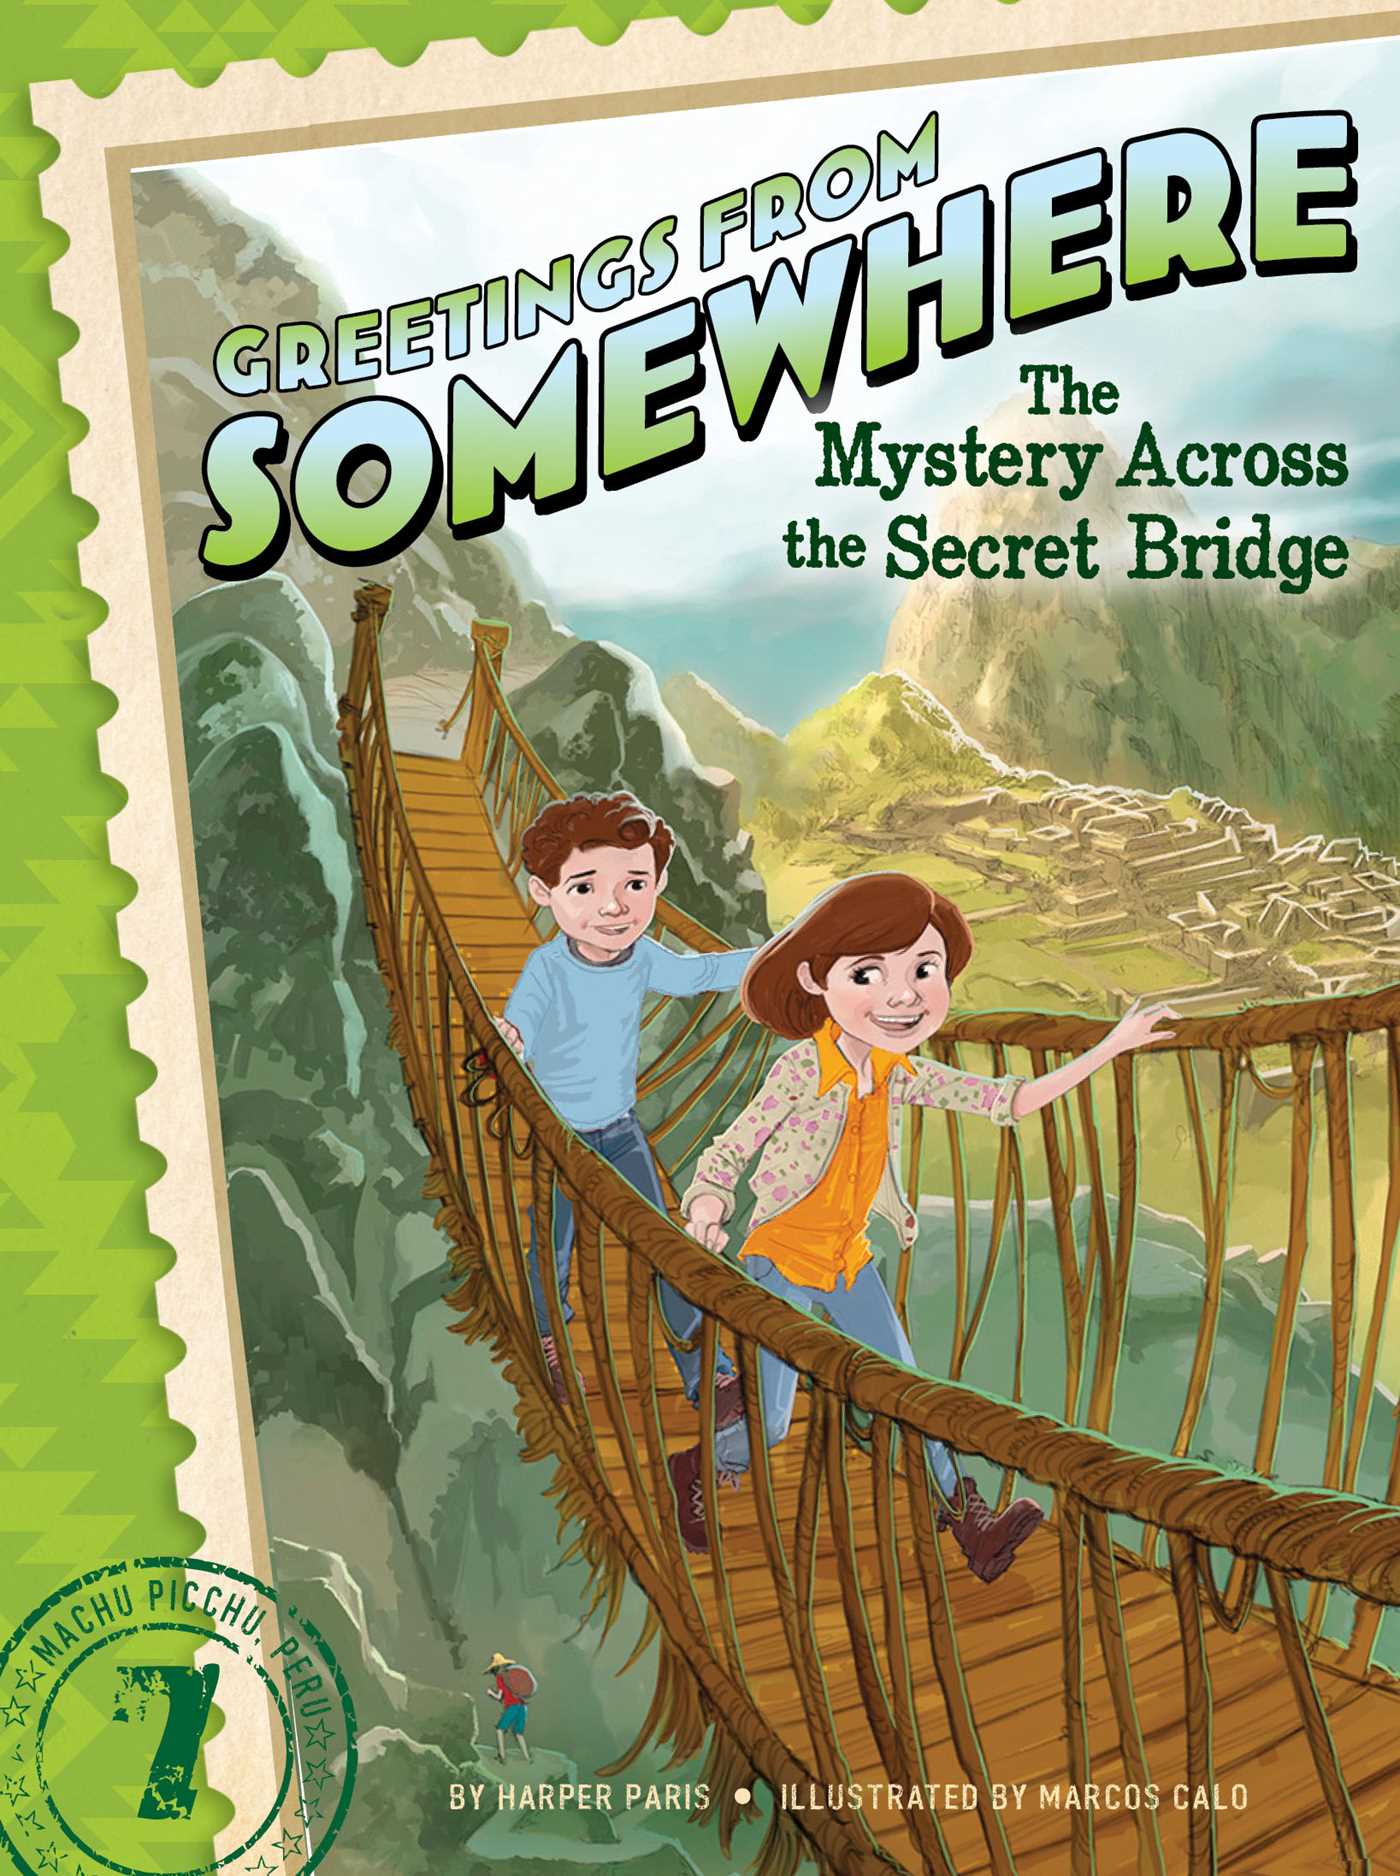 The Mystery Across the Secret Bridge (Greetings from Somewhere Book 7)